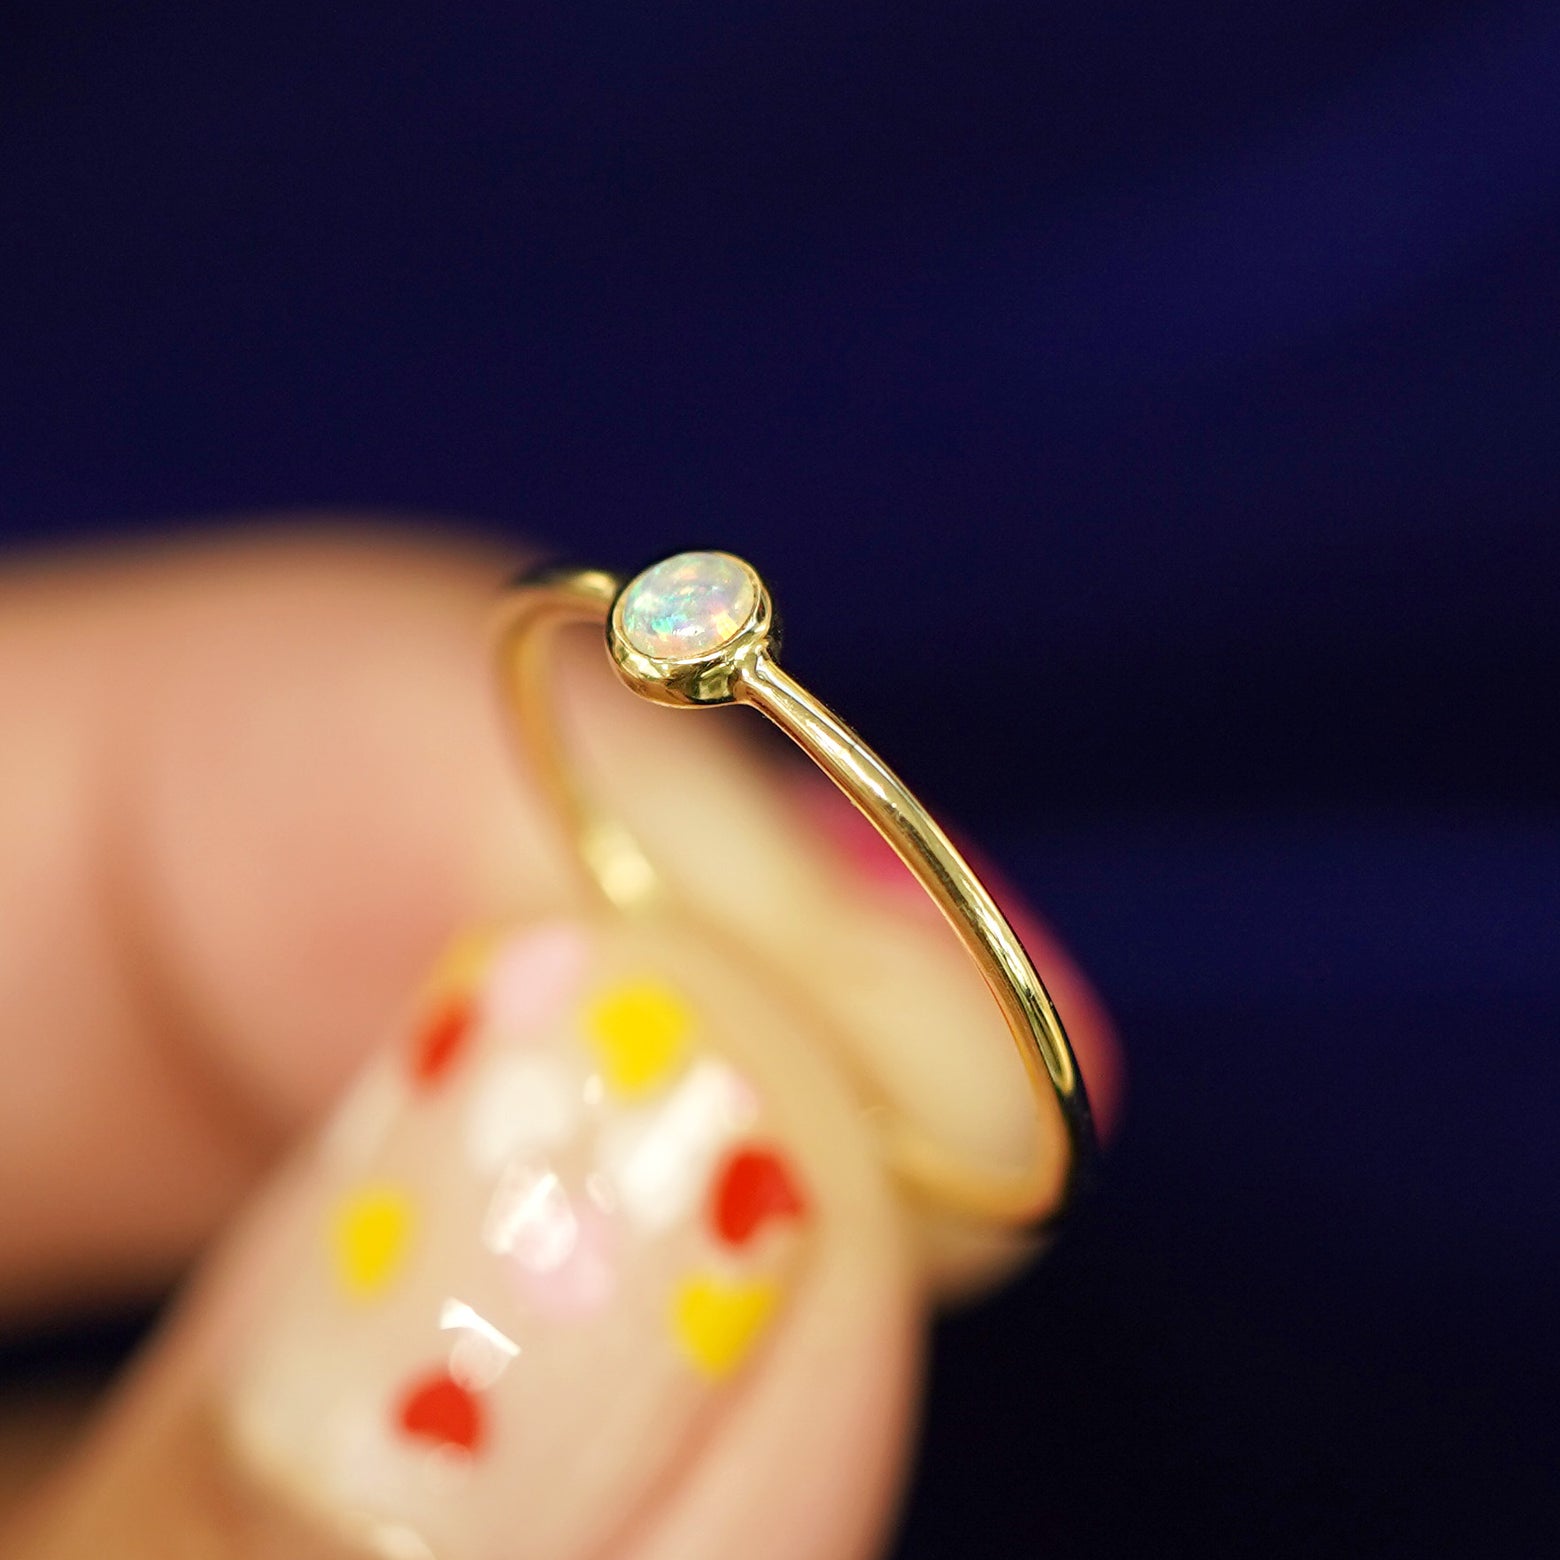 A model holding a 14k gold Opal Ring between their fingers to show the details of the bezel set stone